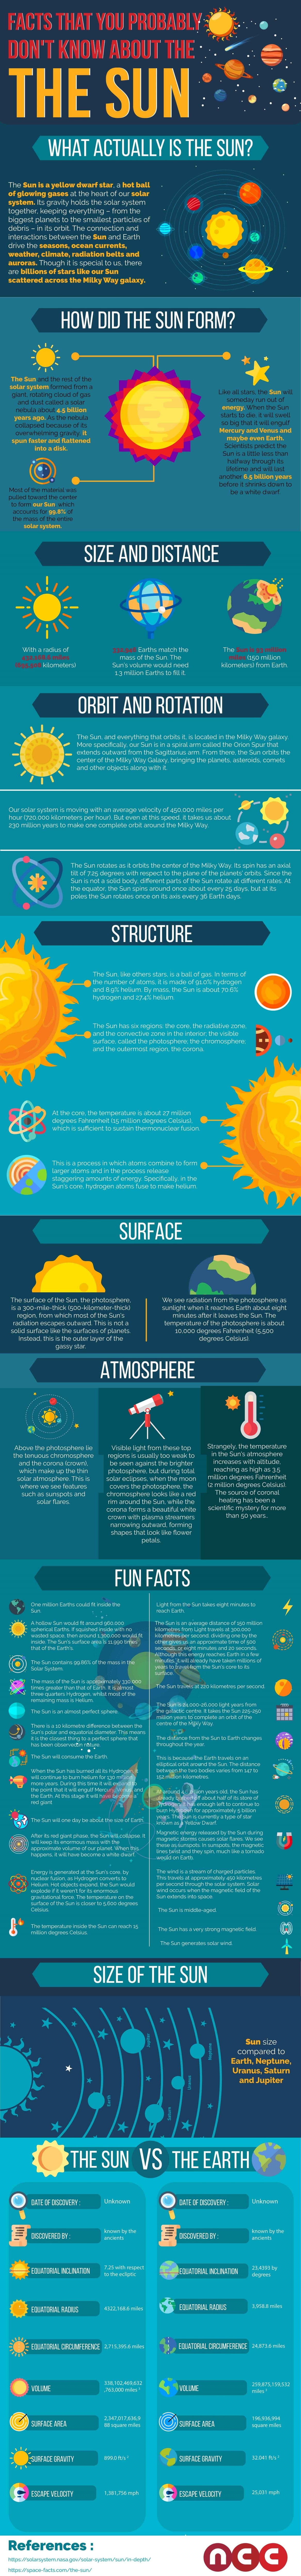 Things You Probably Didn't Know About The Sun